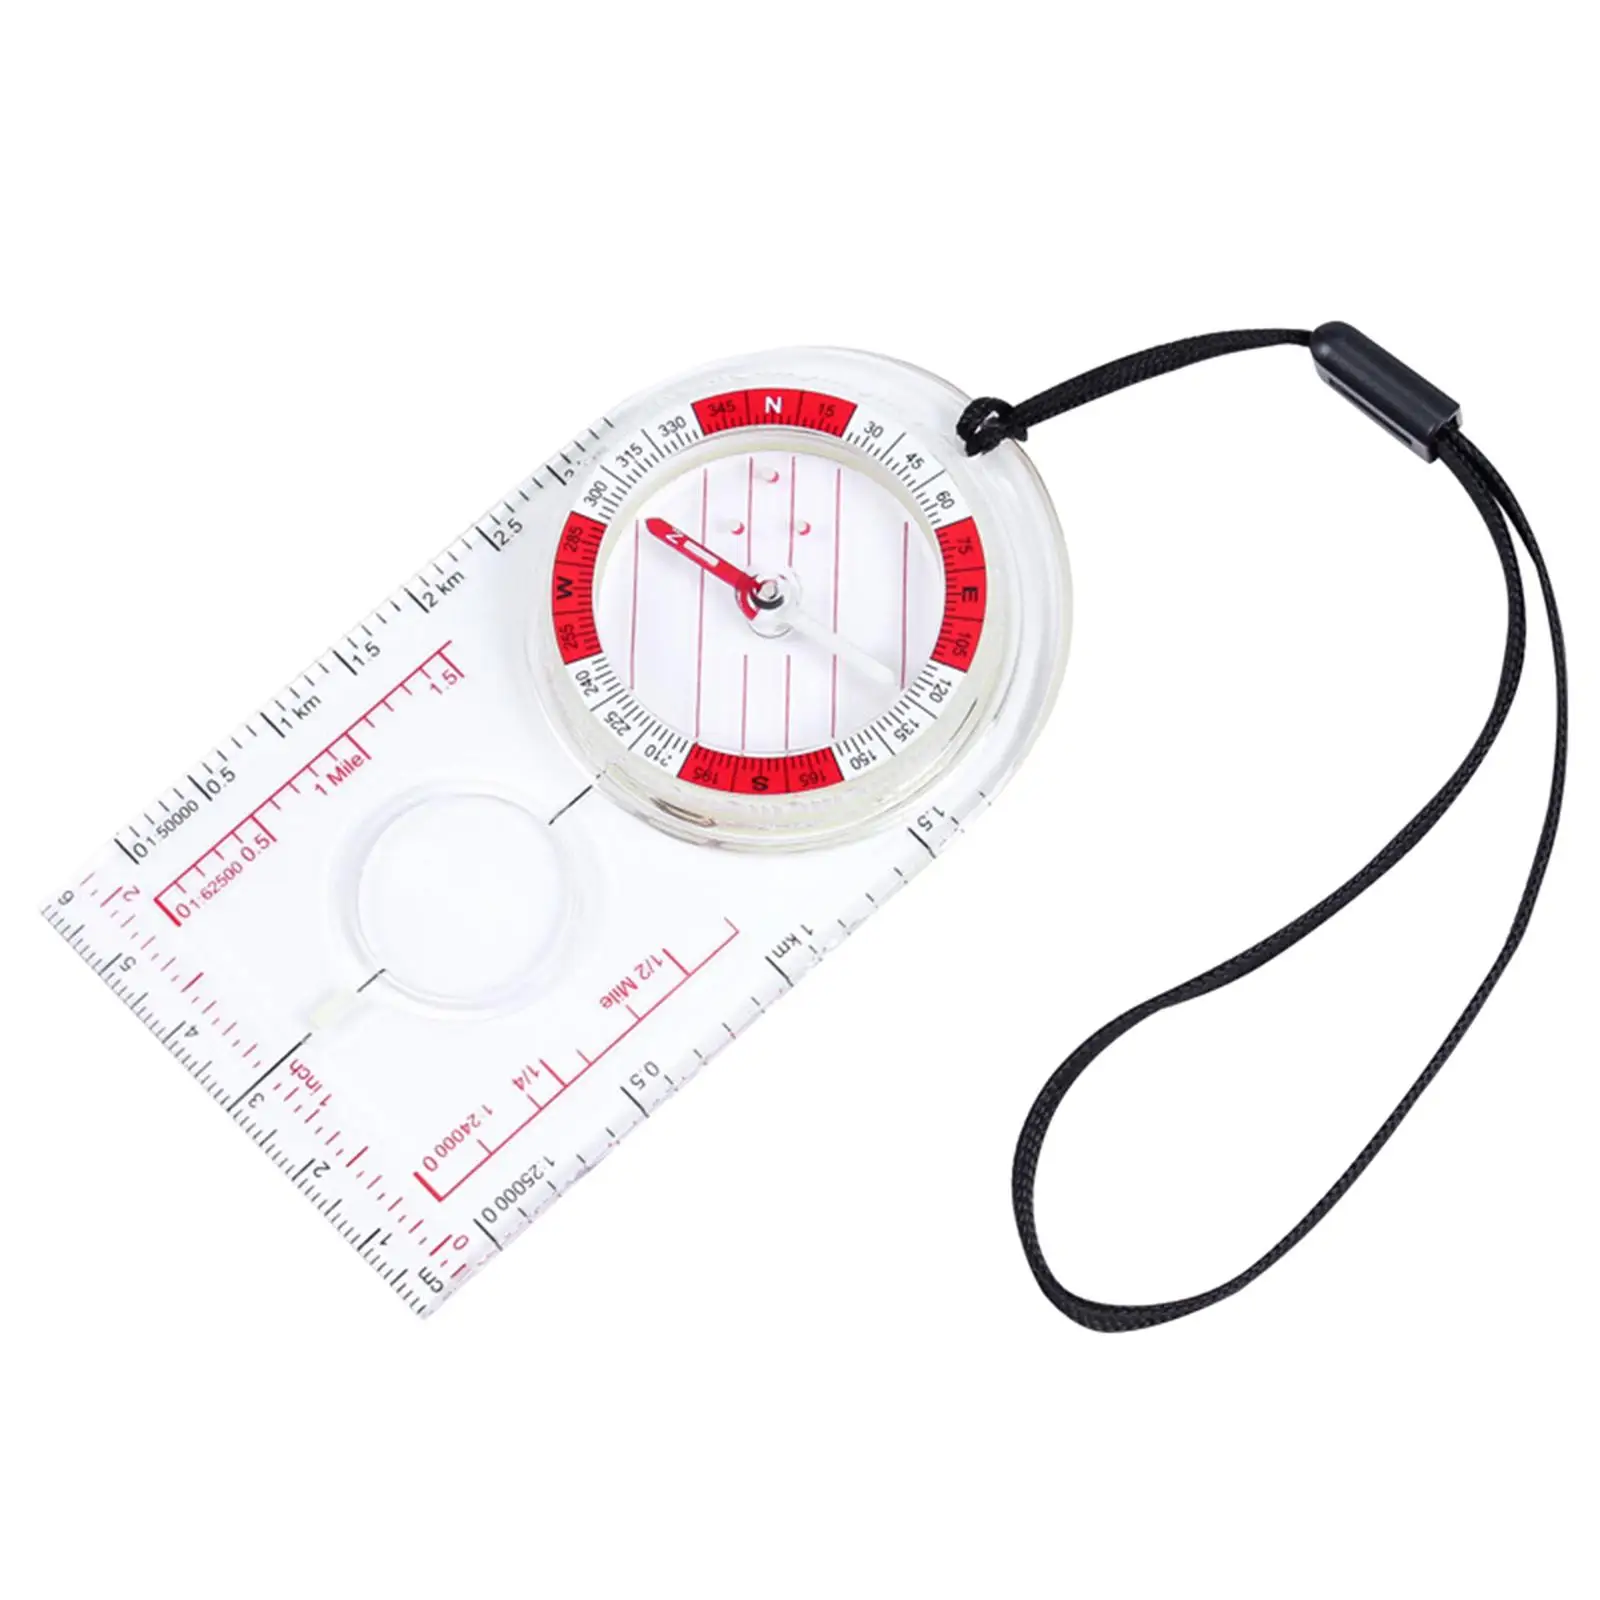 Orienteering Compass Athletics Outdoor Luminous Compass for Training Hiking Reading Survival Camping Backpacking